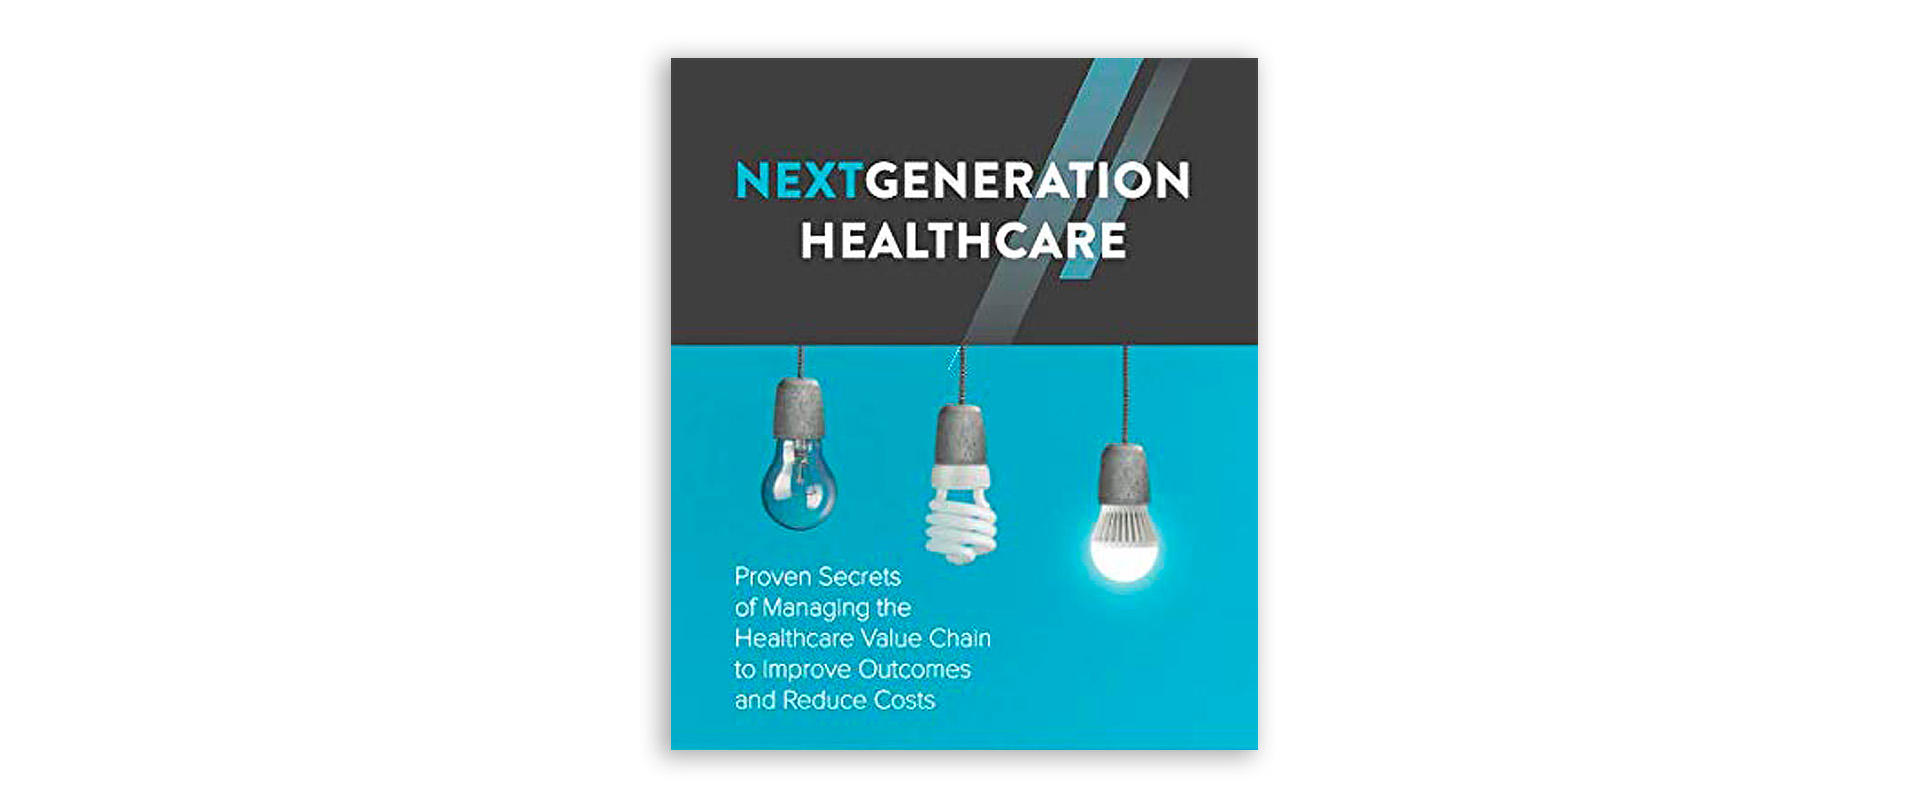 NextGeneration Healthcare: Proven Secrets of Managing the Healthcare Value Chain to Improve Outcomes and Reduce Costs